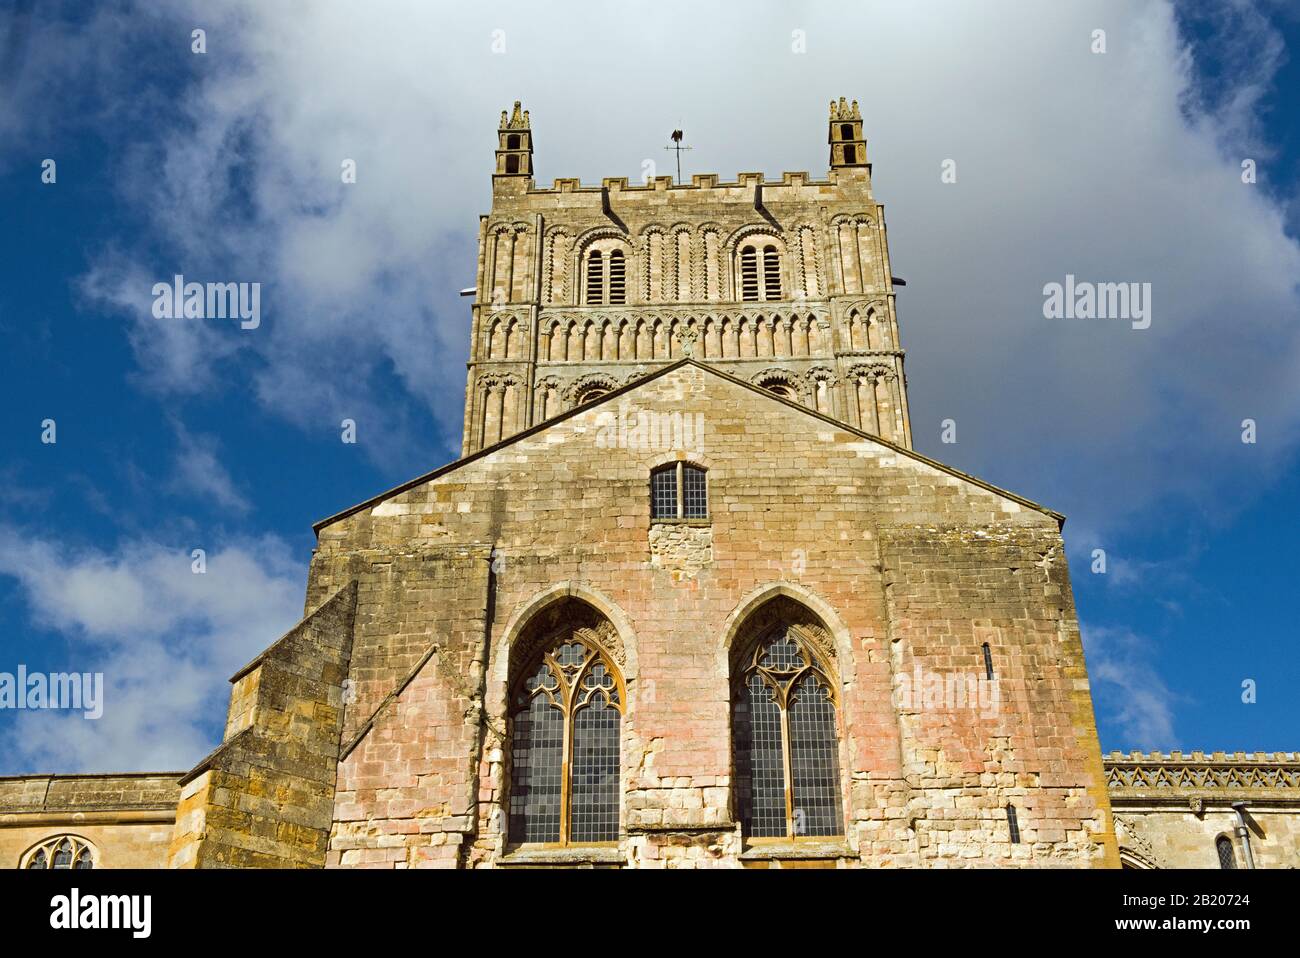 Tewkesbury Abbey tower  in Gloucestershire on a sunny blue sky day Stock Photo